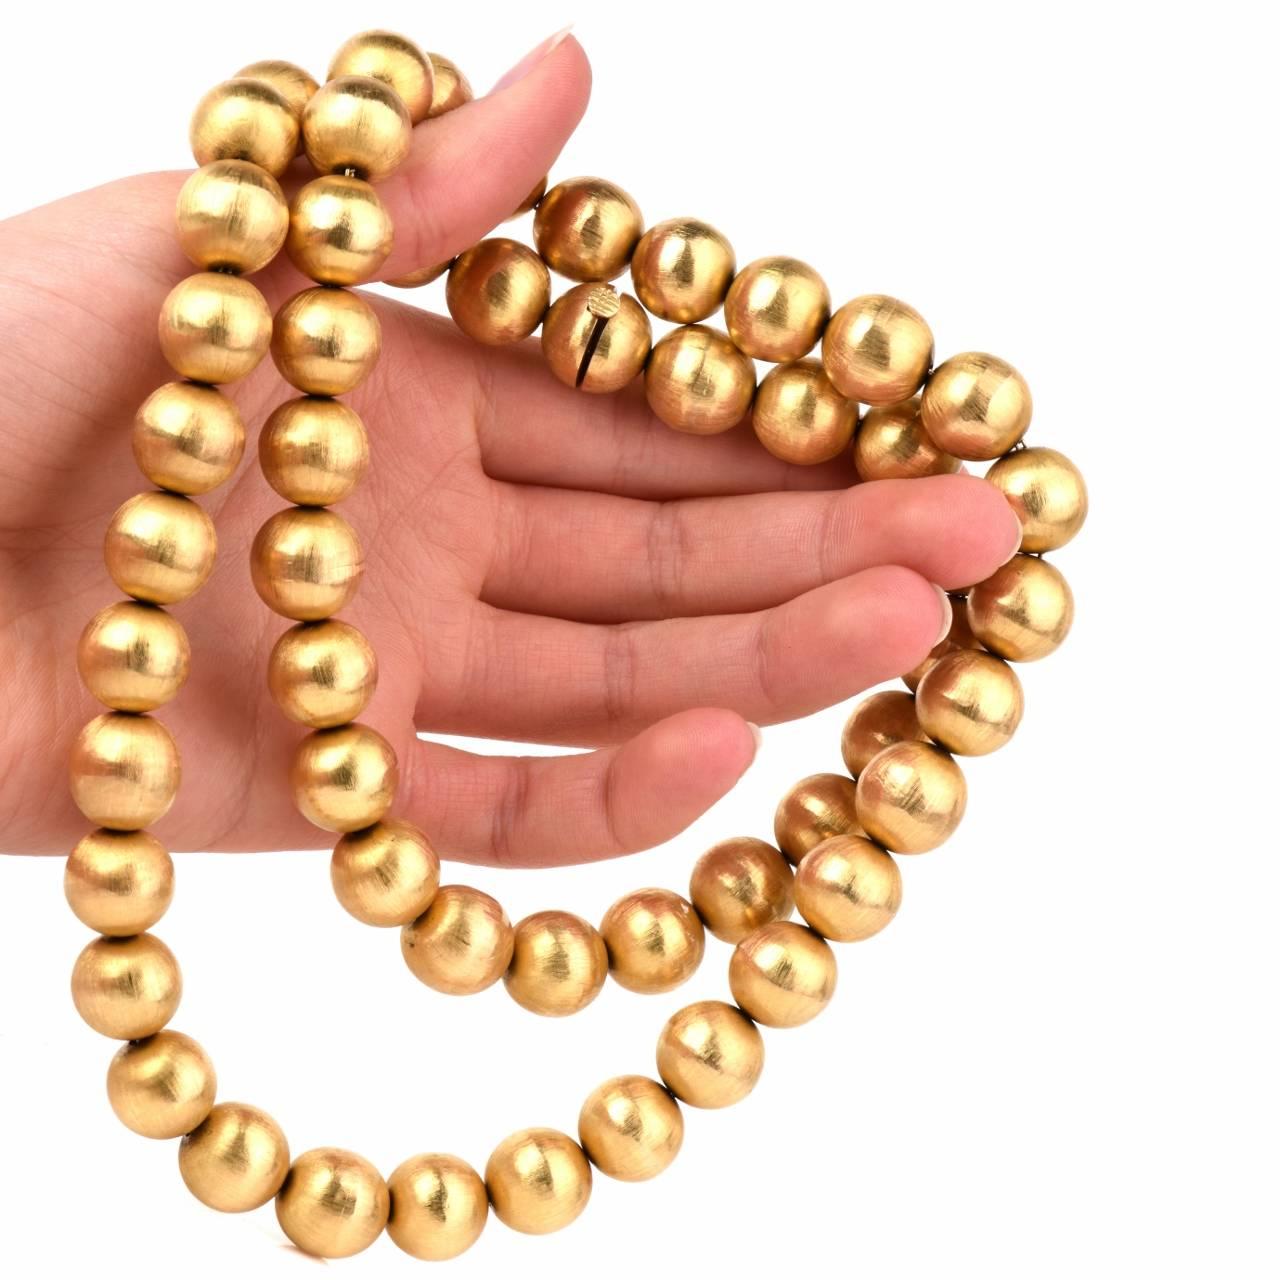 Women's 1980s Gold 14mm Beads Necklace